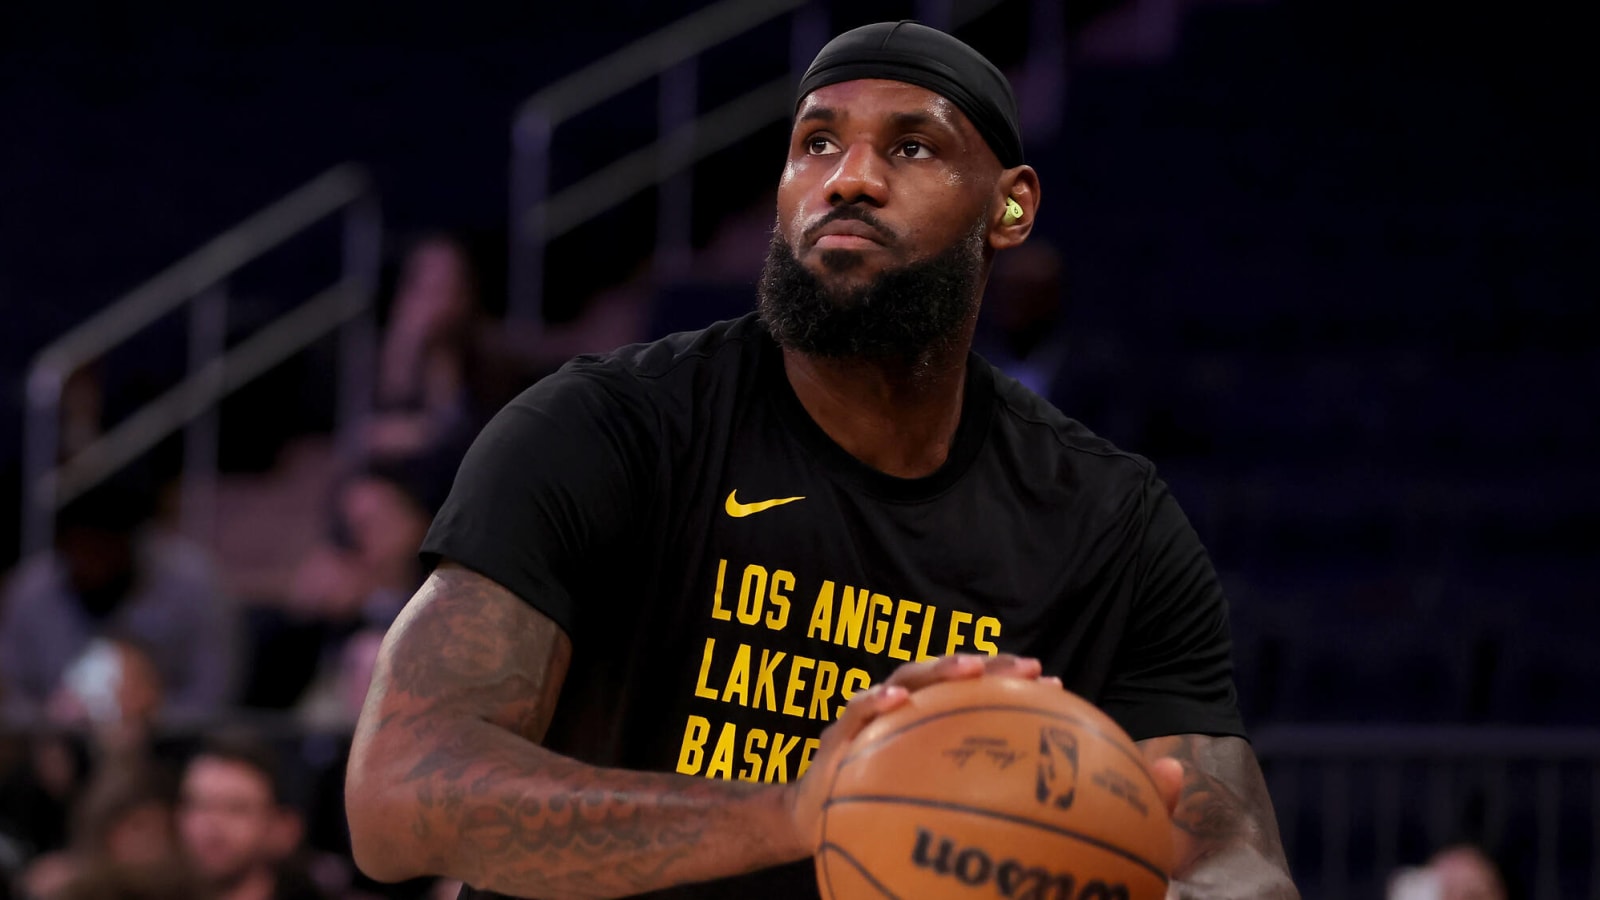 Video Of LeBron James Singing Iconic Michael Jackson Song For Pregame Goes Viral